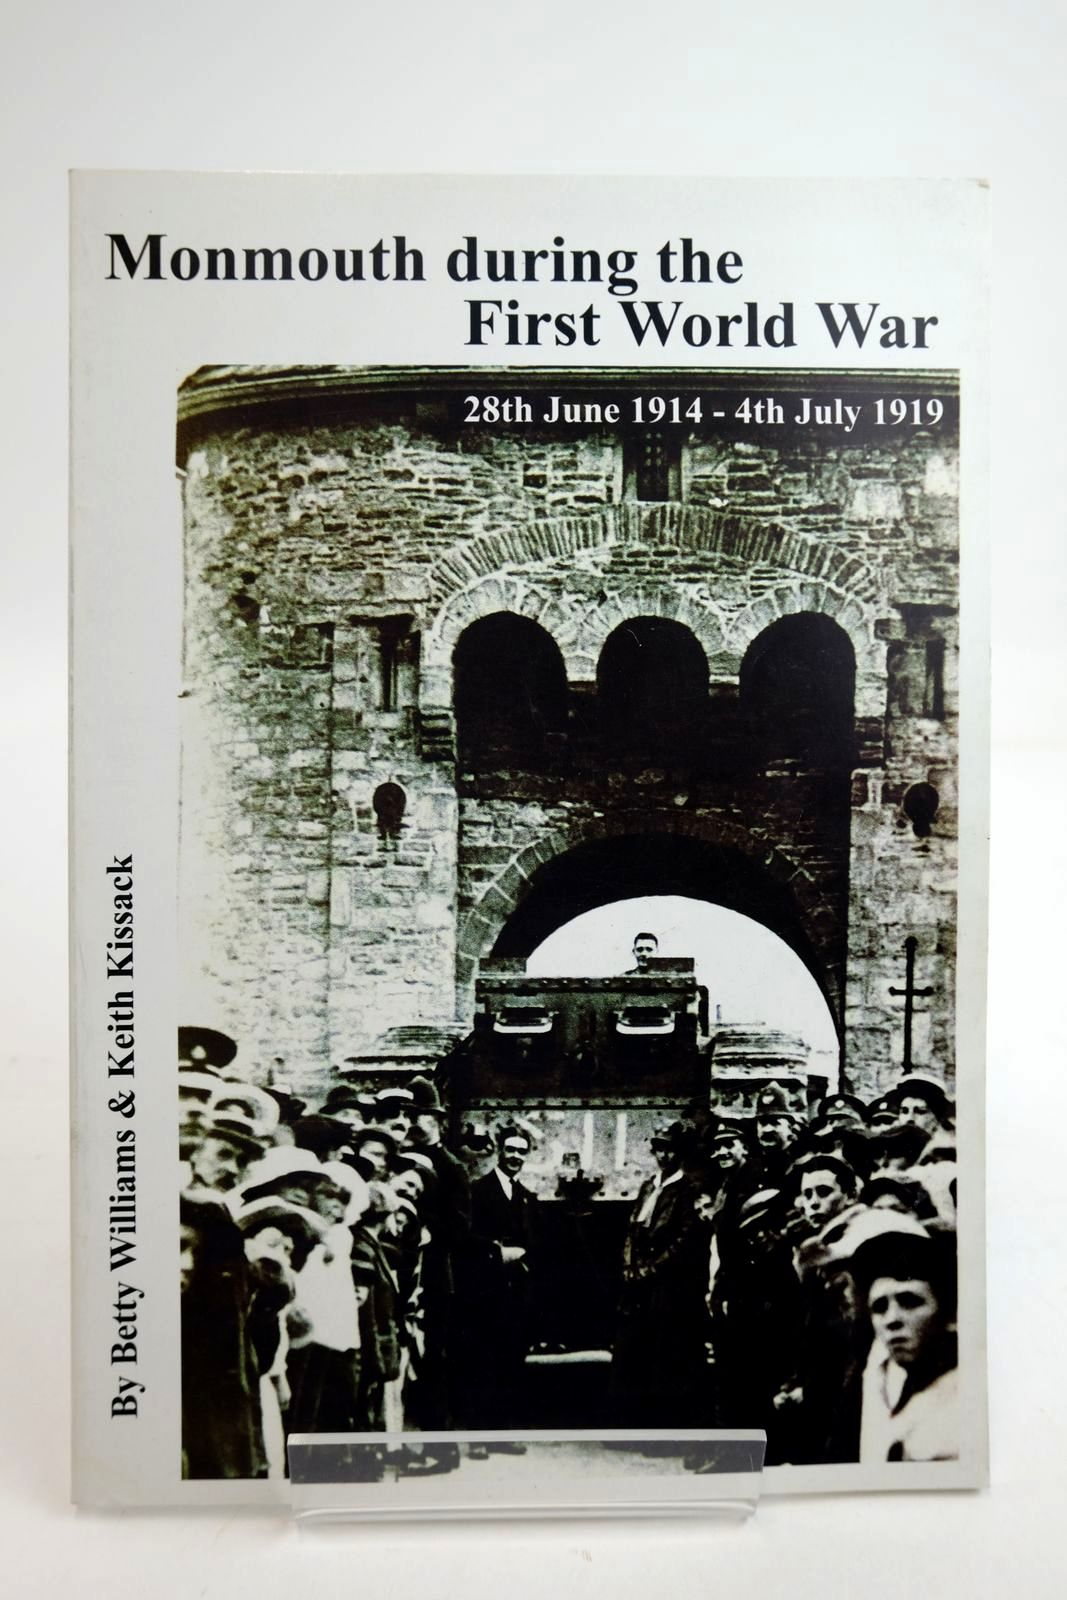 Photo of MONMOUTH DURING THE FIRST WORLD WAR 28TH JUNE 1914 - JULY 1919 written by Williams, Betty Kissack, Keith (STOCK CODE: 2134369)  for sale by Stella & Rose's Books